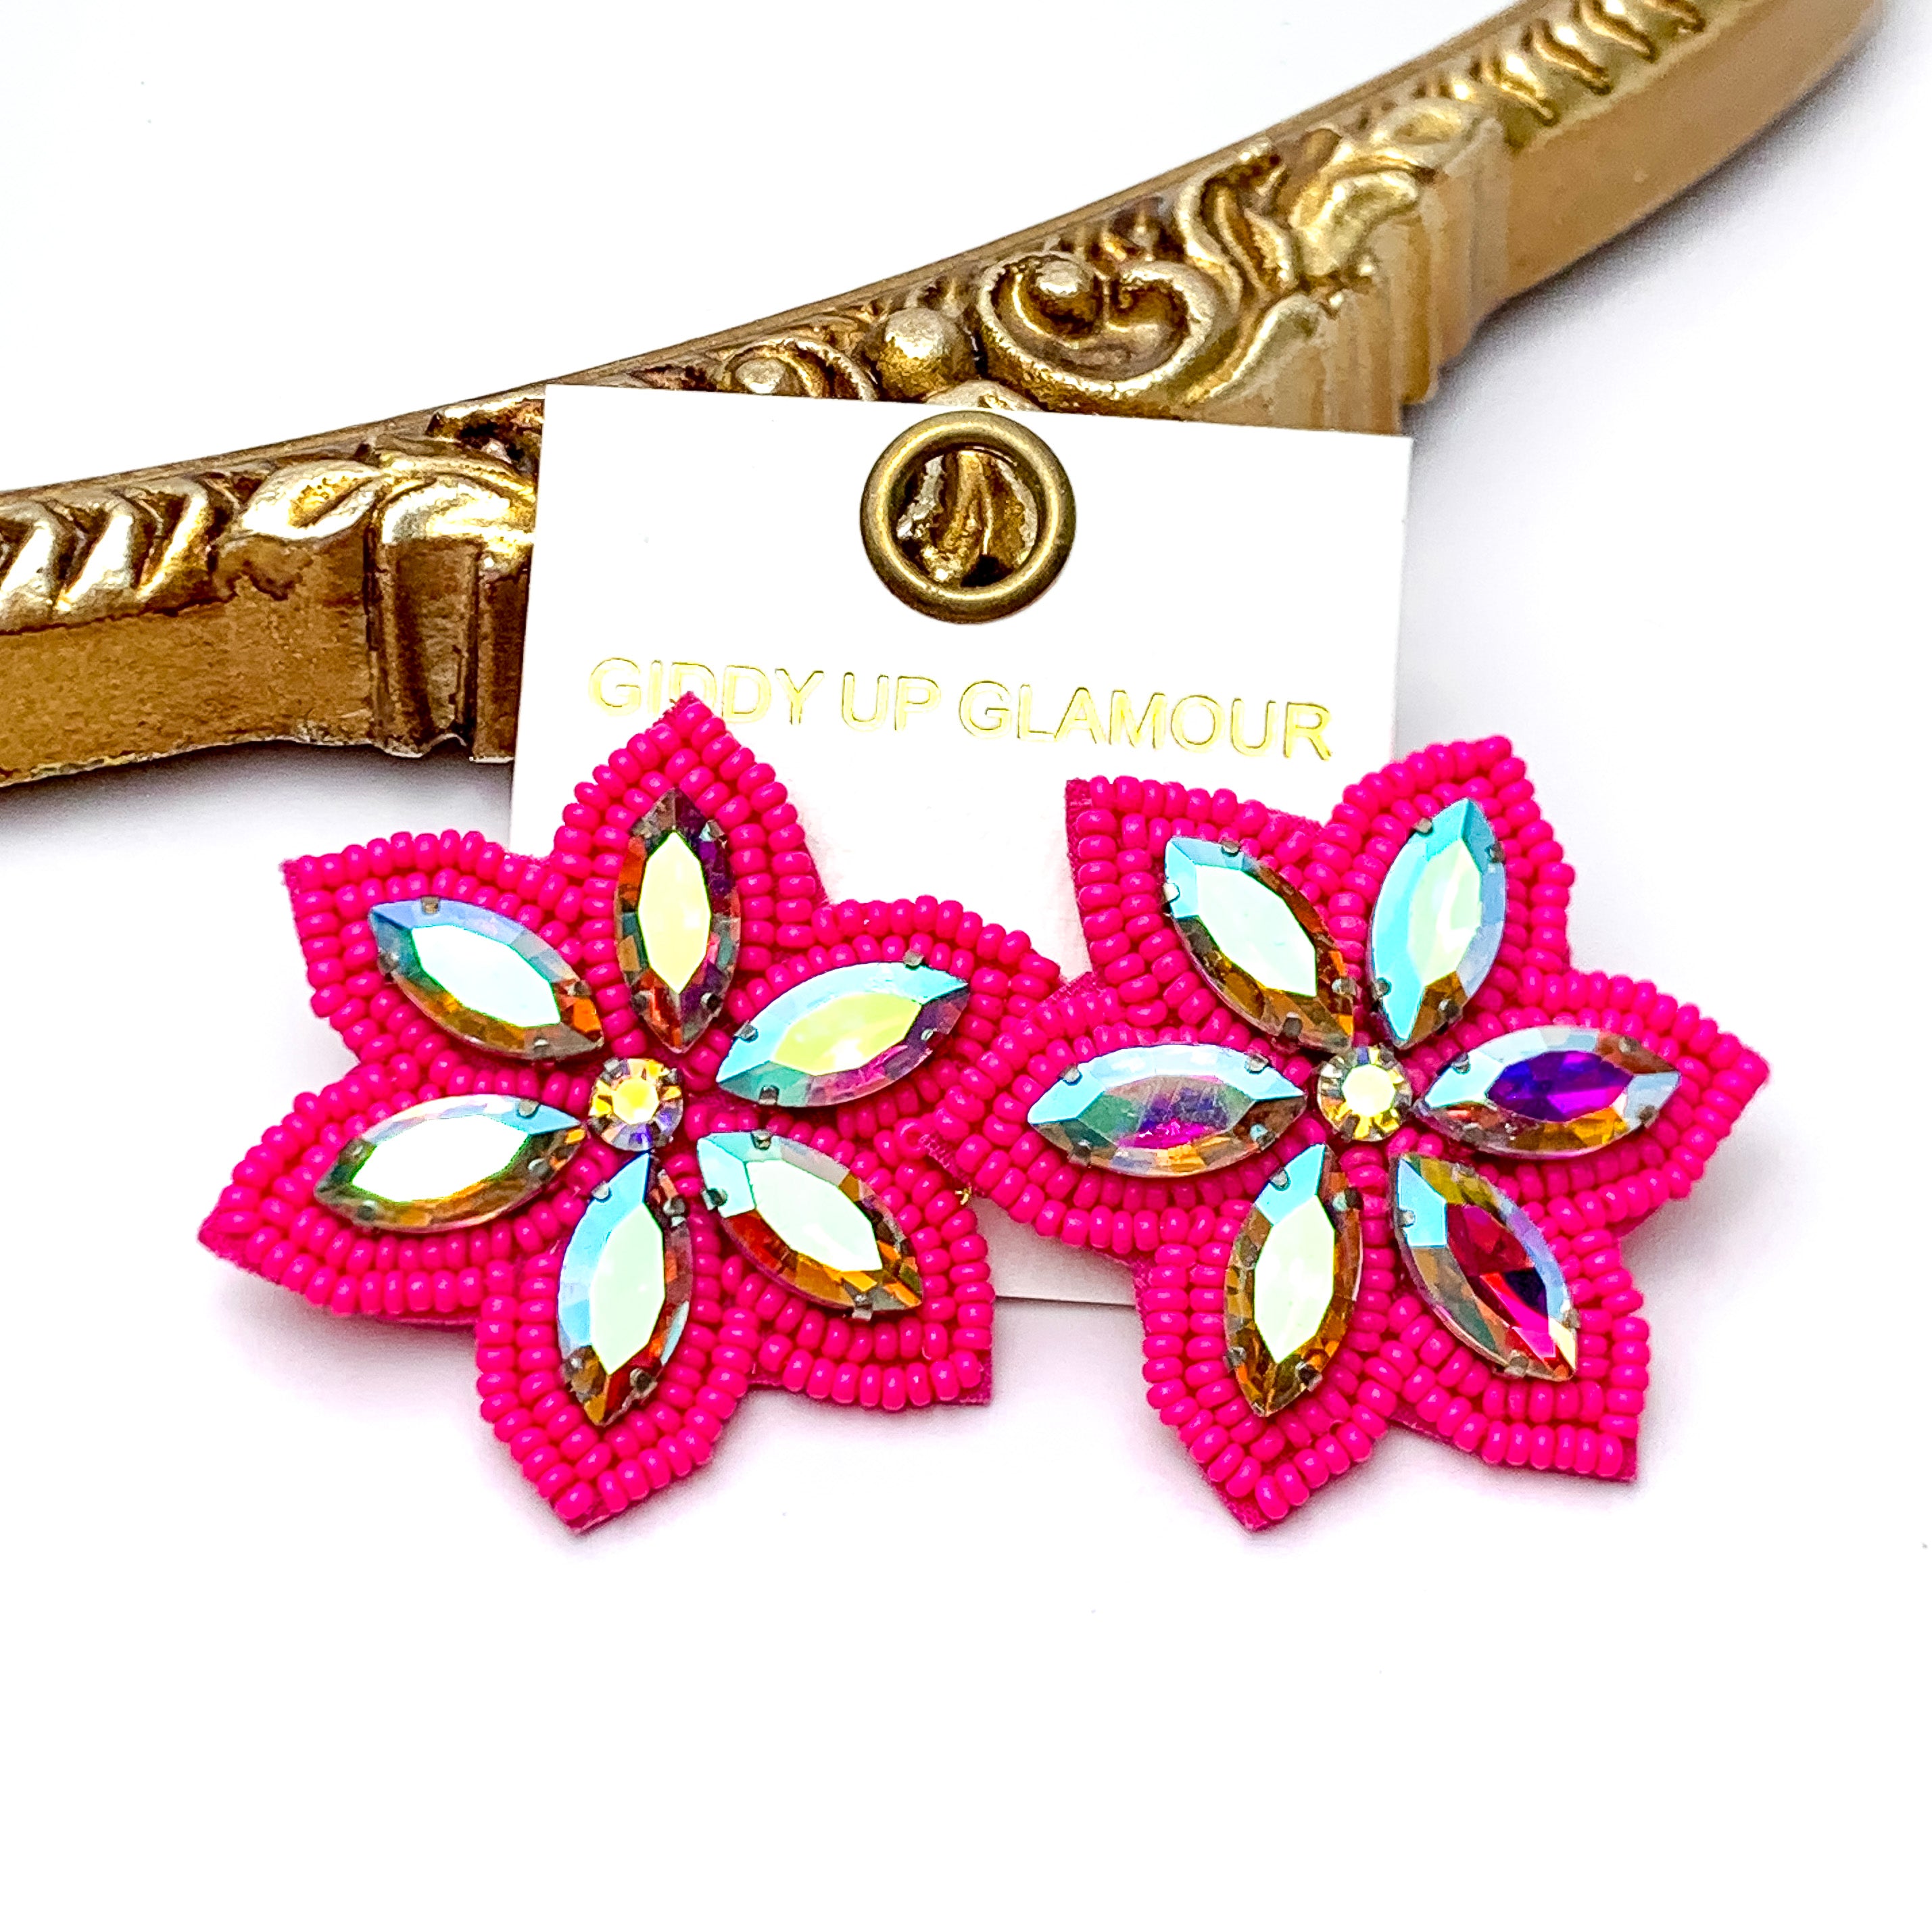 Prismatic Petals Seed Bead Flower Stud Earrings with AB stones in Fuchsia Pink